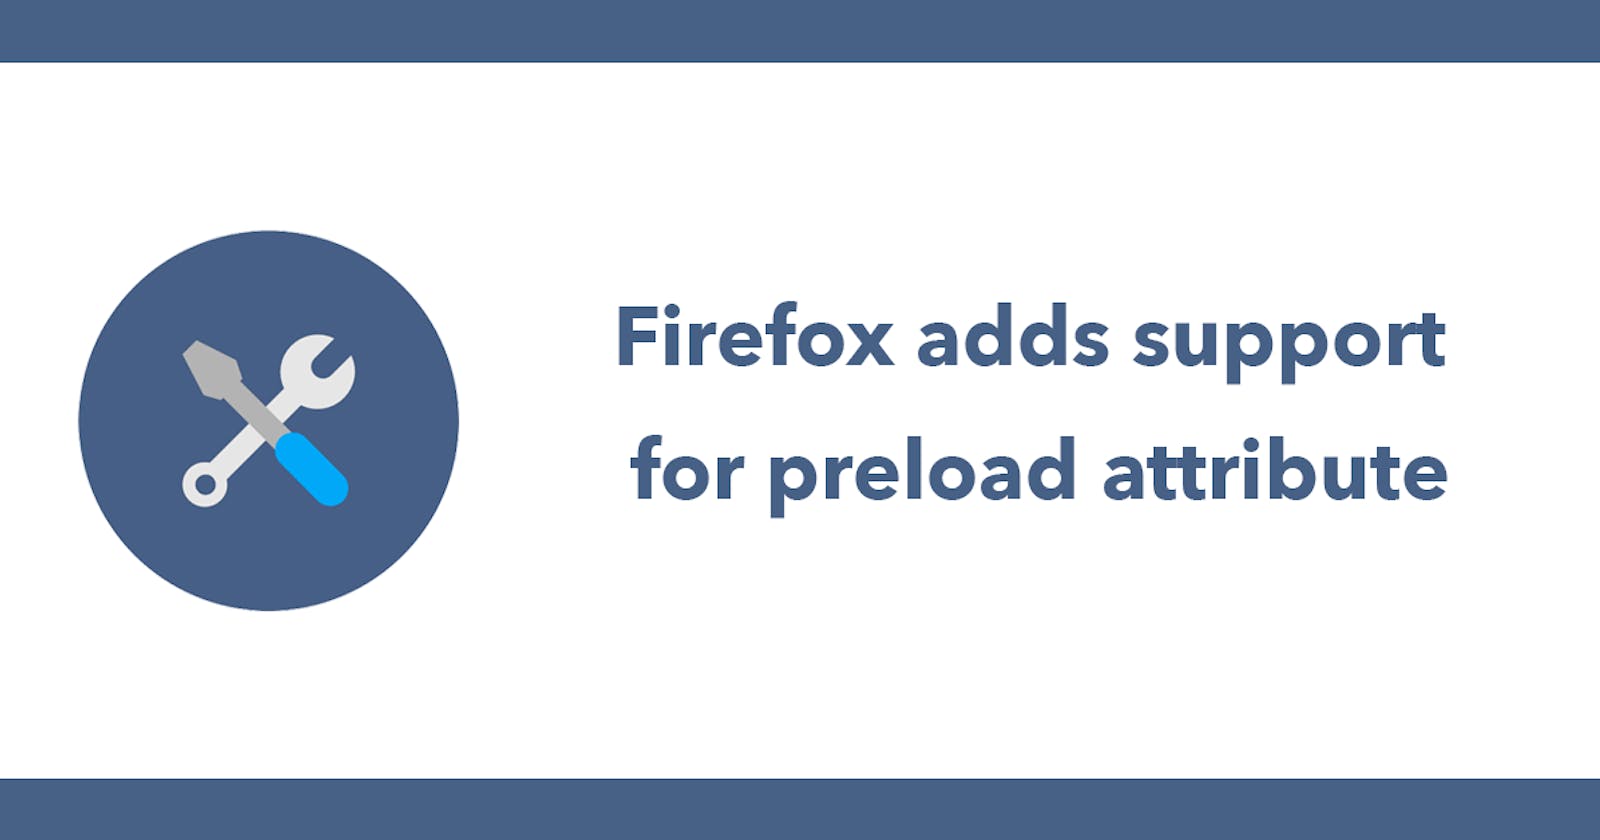 Firefox adds support for preload attribute